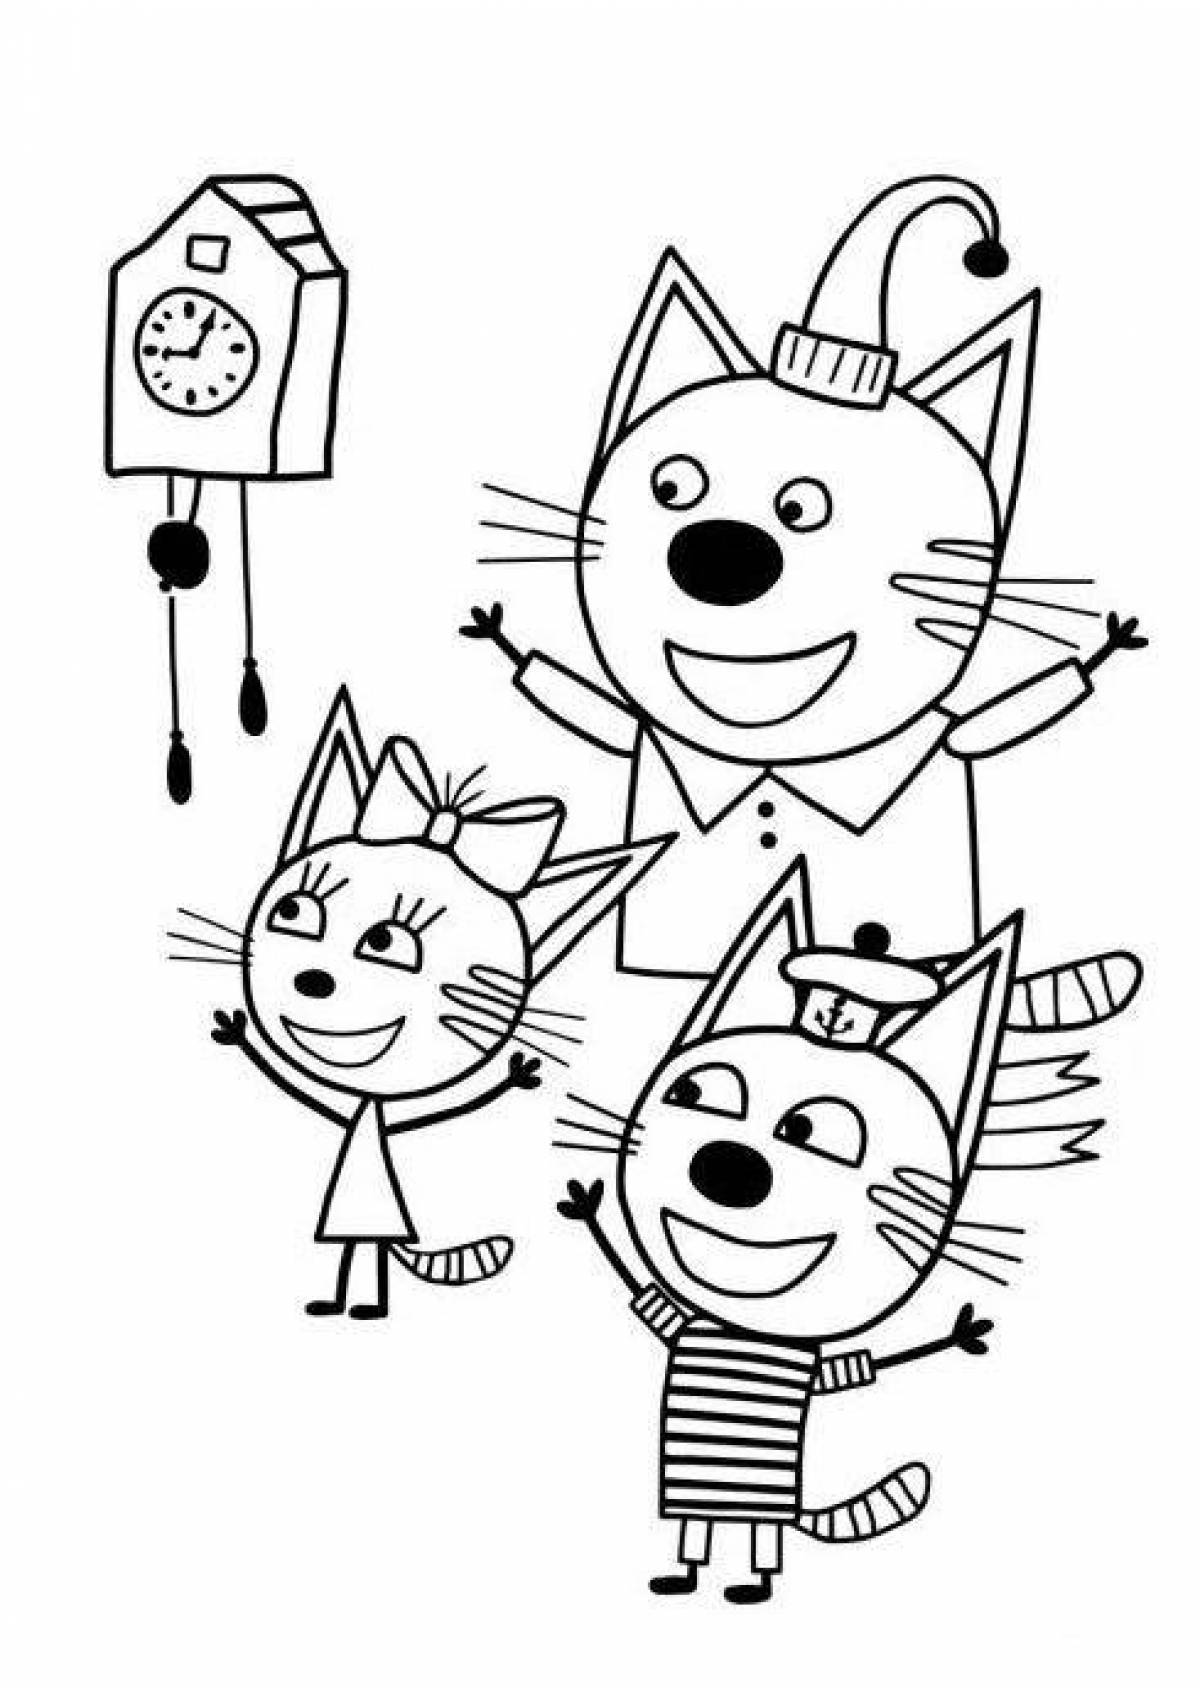 Coloring book magic compote of three cats